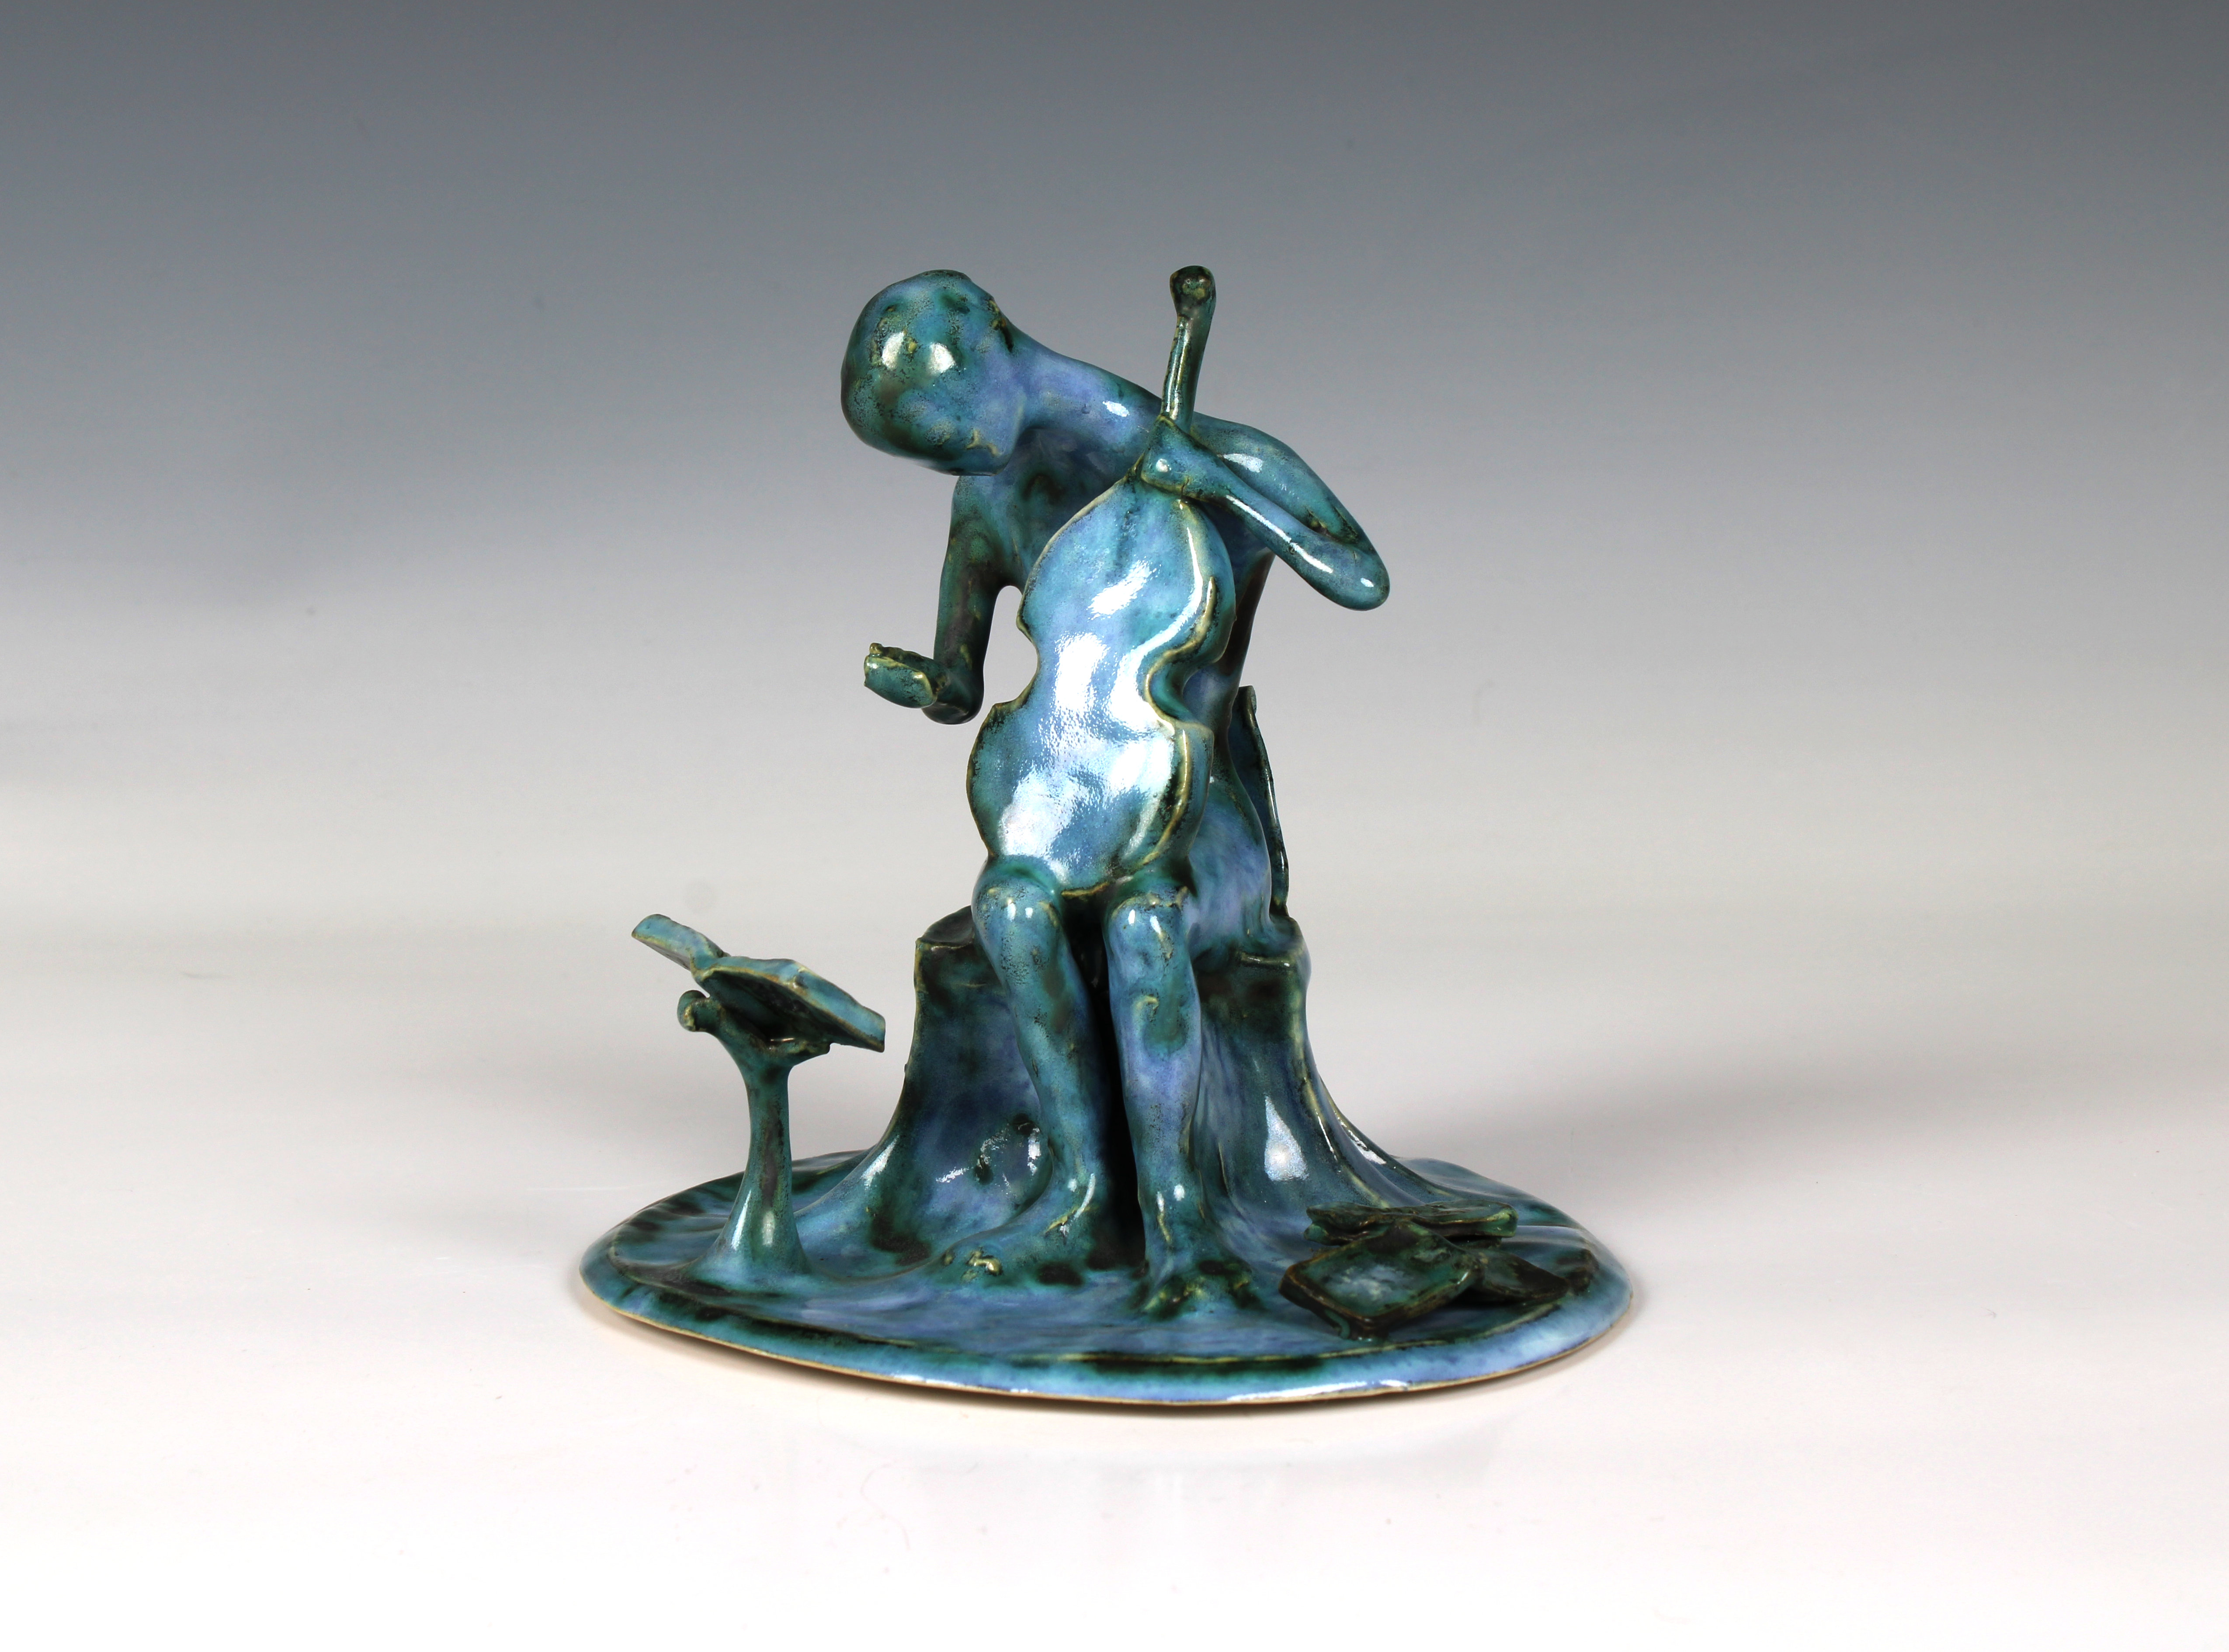 Elizabeth Ann Macphail (1939-89) A turquoise glazed stylised cellist or violin player sculpture